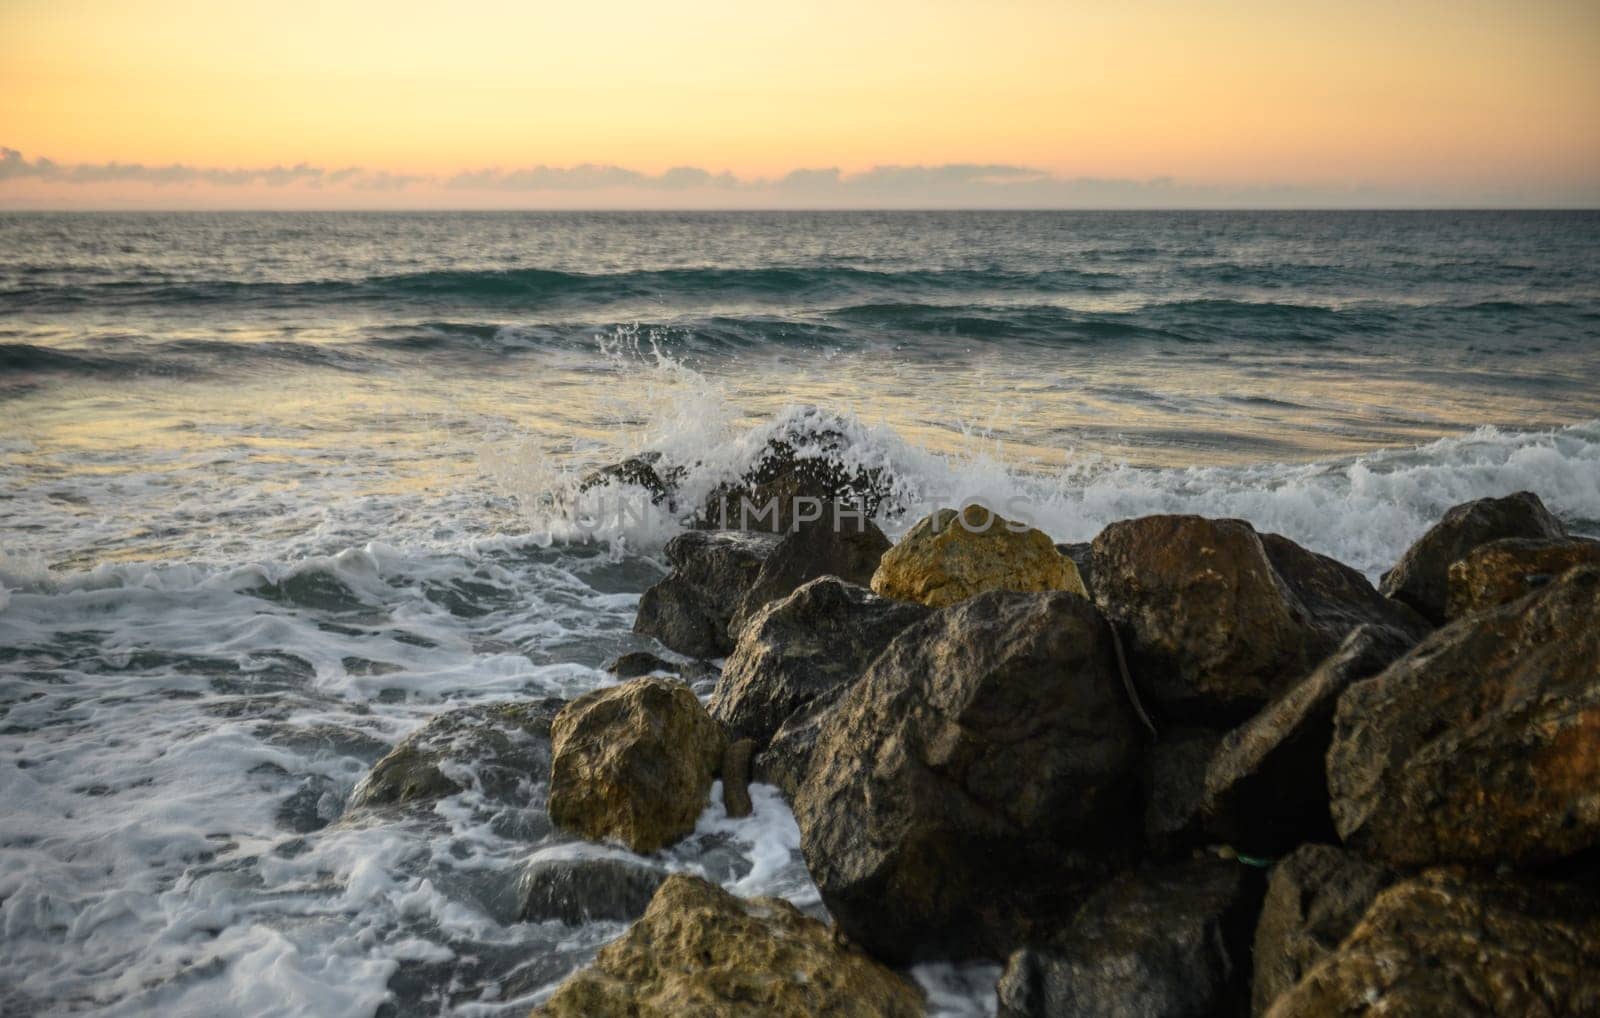 waves and splashes of water on rocks on the Mediterranean Sea in Northern Cyprus 1 by Mixa74